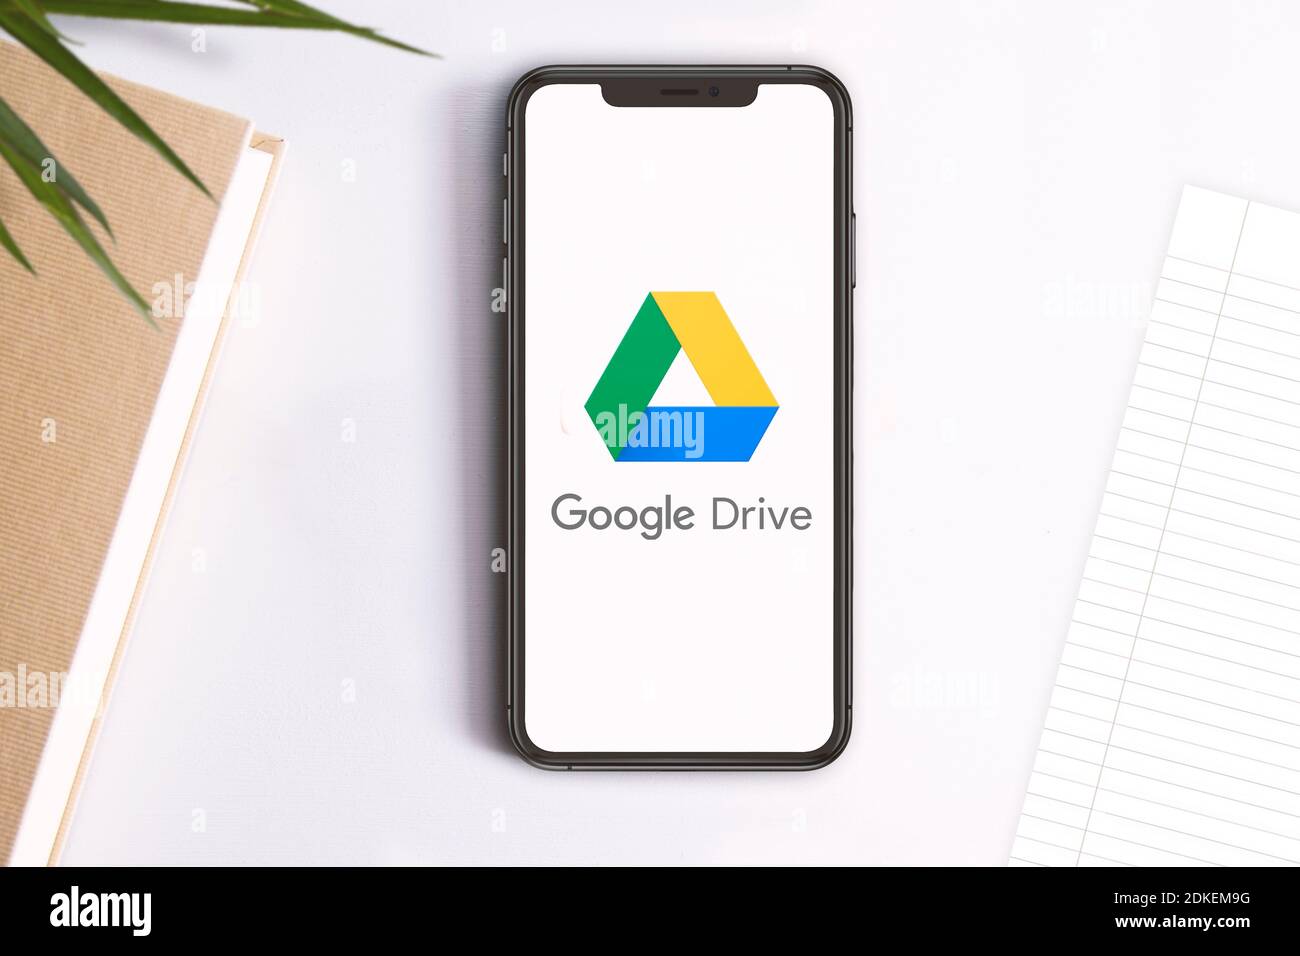 Smartphone with Google Drive Service app logo on the screen. Empty copy space for Editor's content. Stock Photo